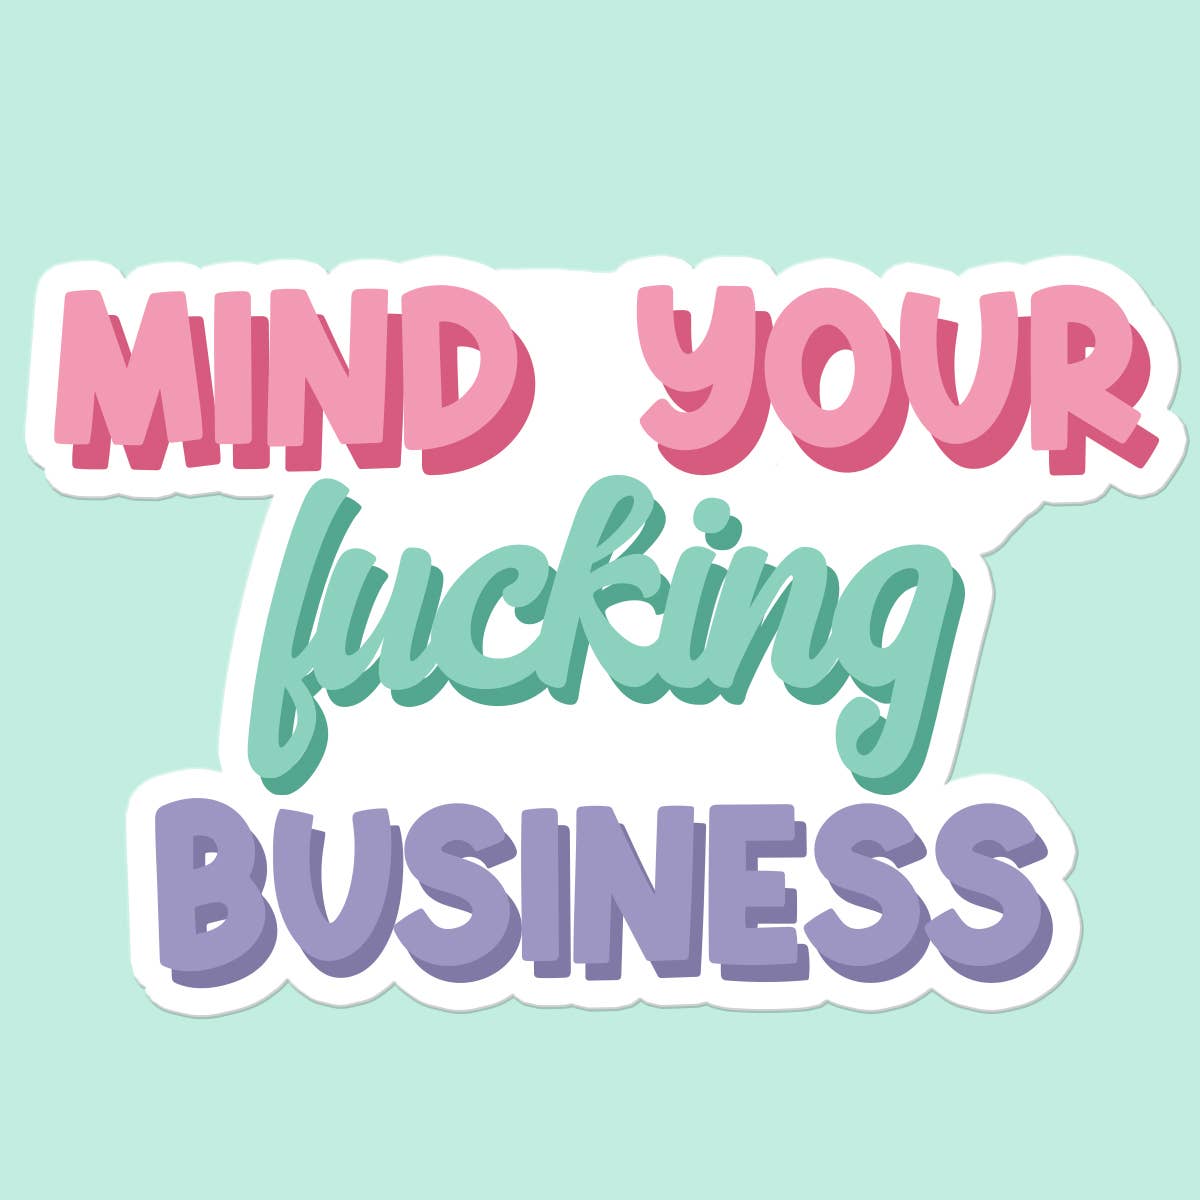 Mugsby - Mind Your Business Funny Sticker Decal